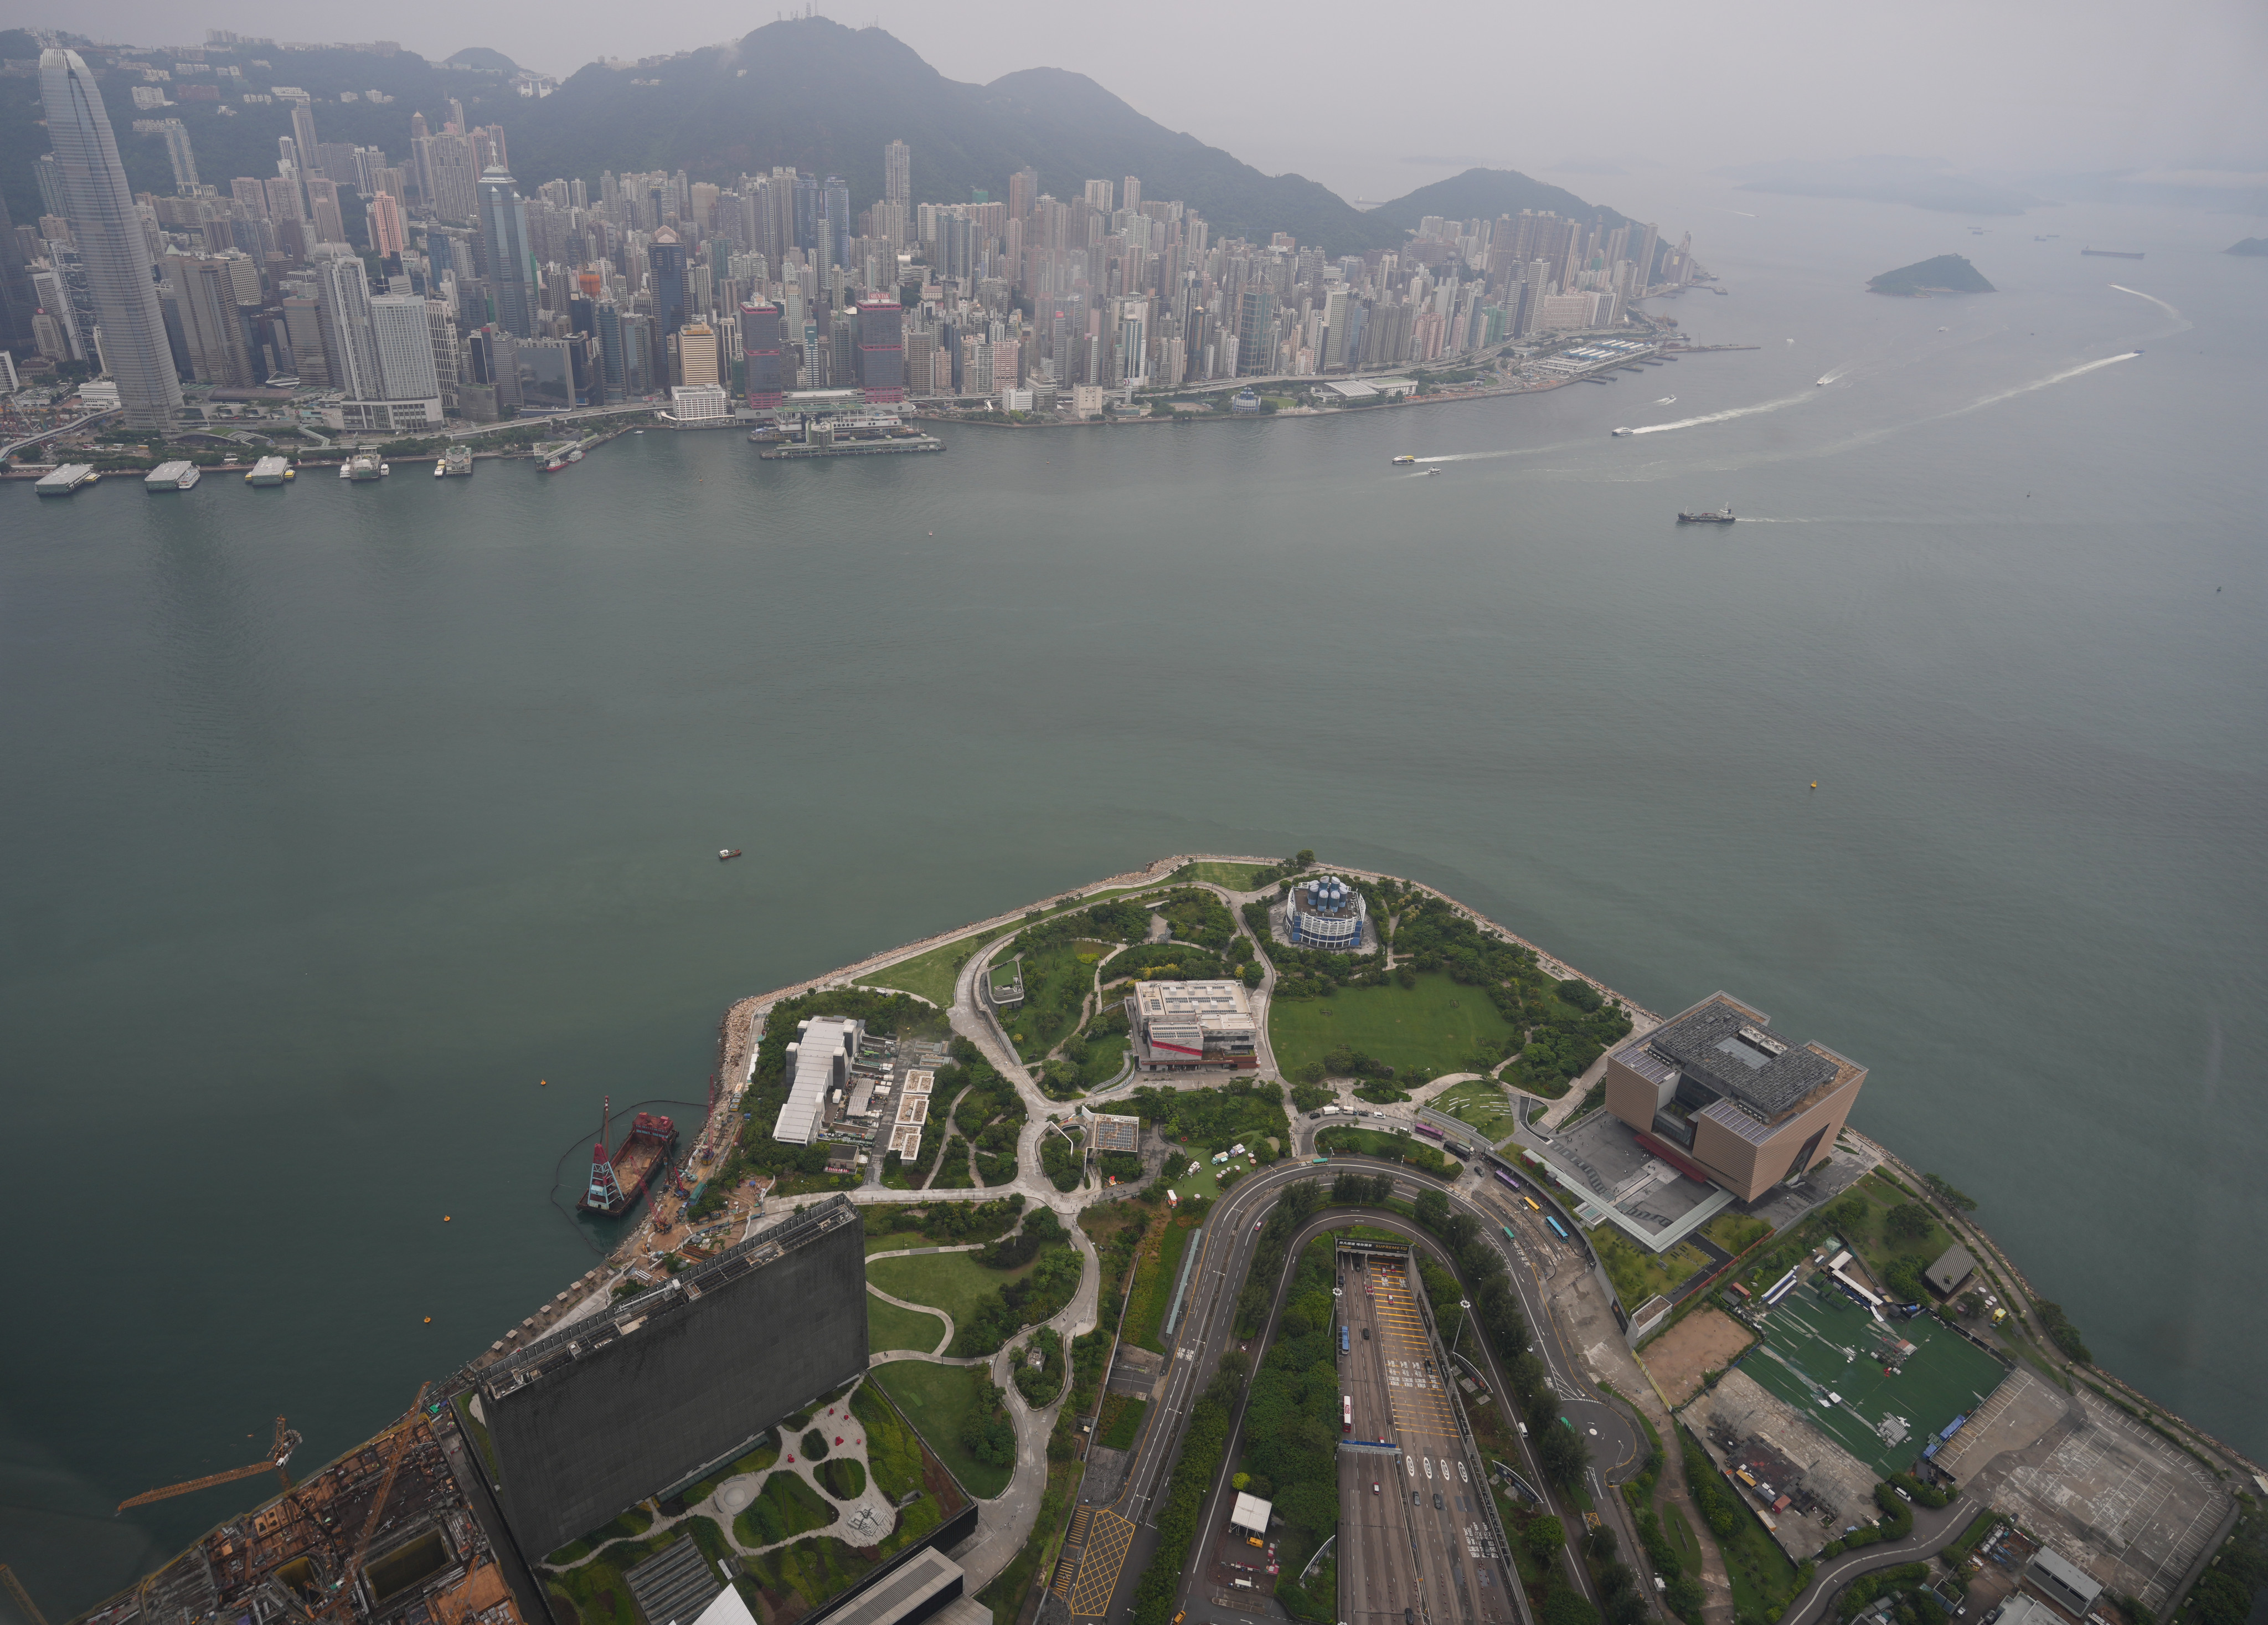 Many performances during the expo will be based at the West Kowloon Cultural District. Photo: Sam Tsang